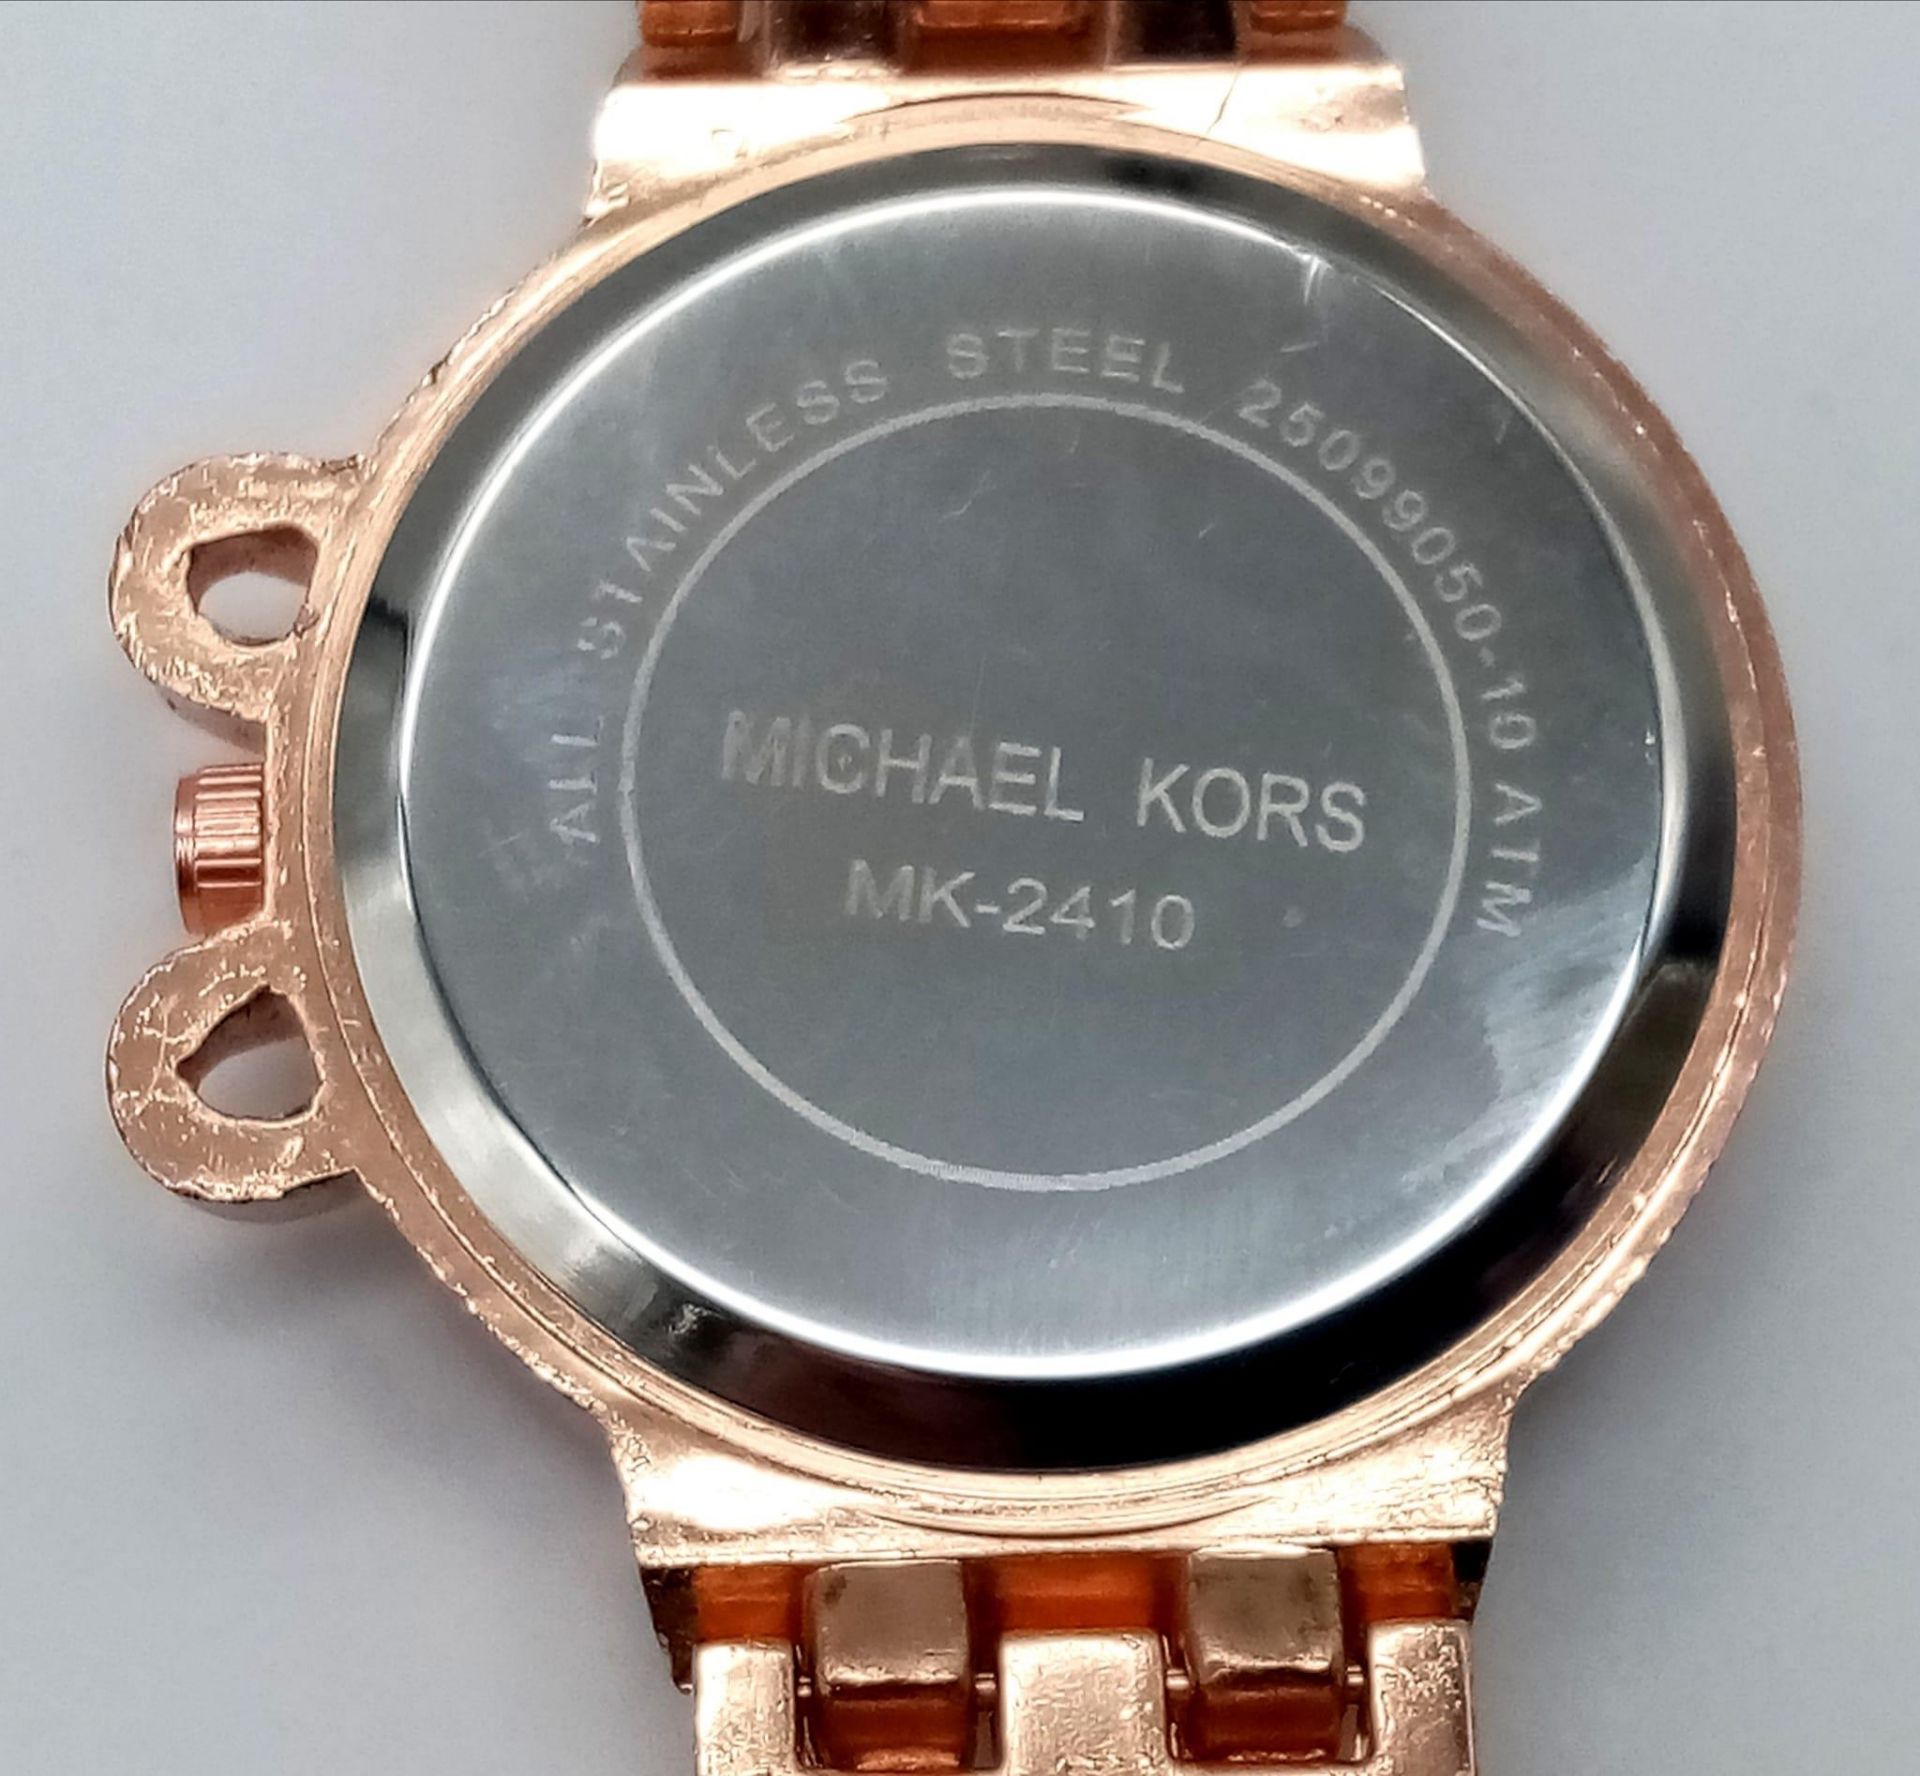 A LADIES MICHAEL KORS FACSIMILE WATCH IN ROSE GOLD TONE STONE SET BEZEL AND STRAP, FULL WORKING - Image 4 of 4